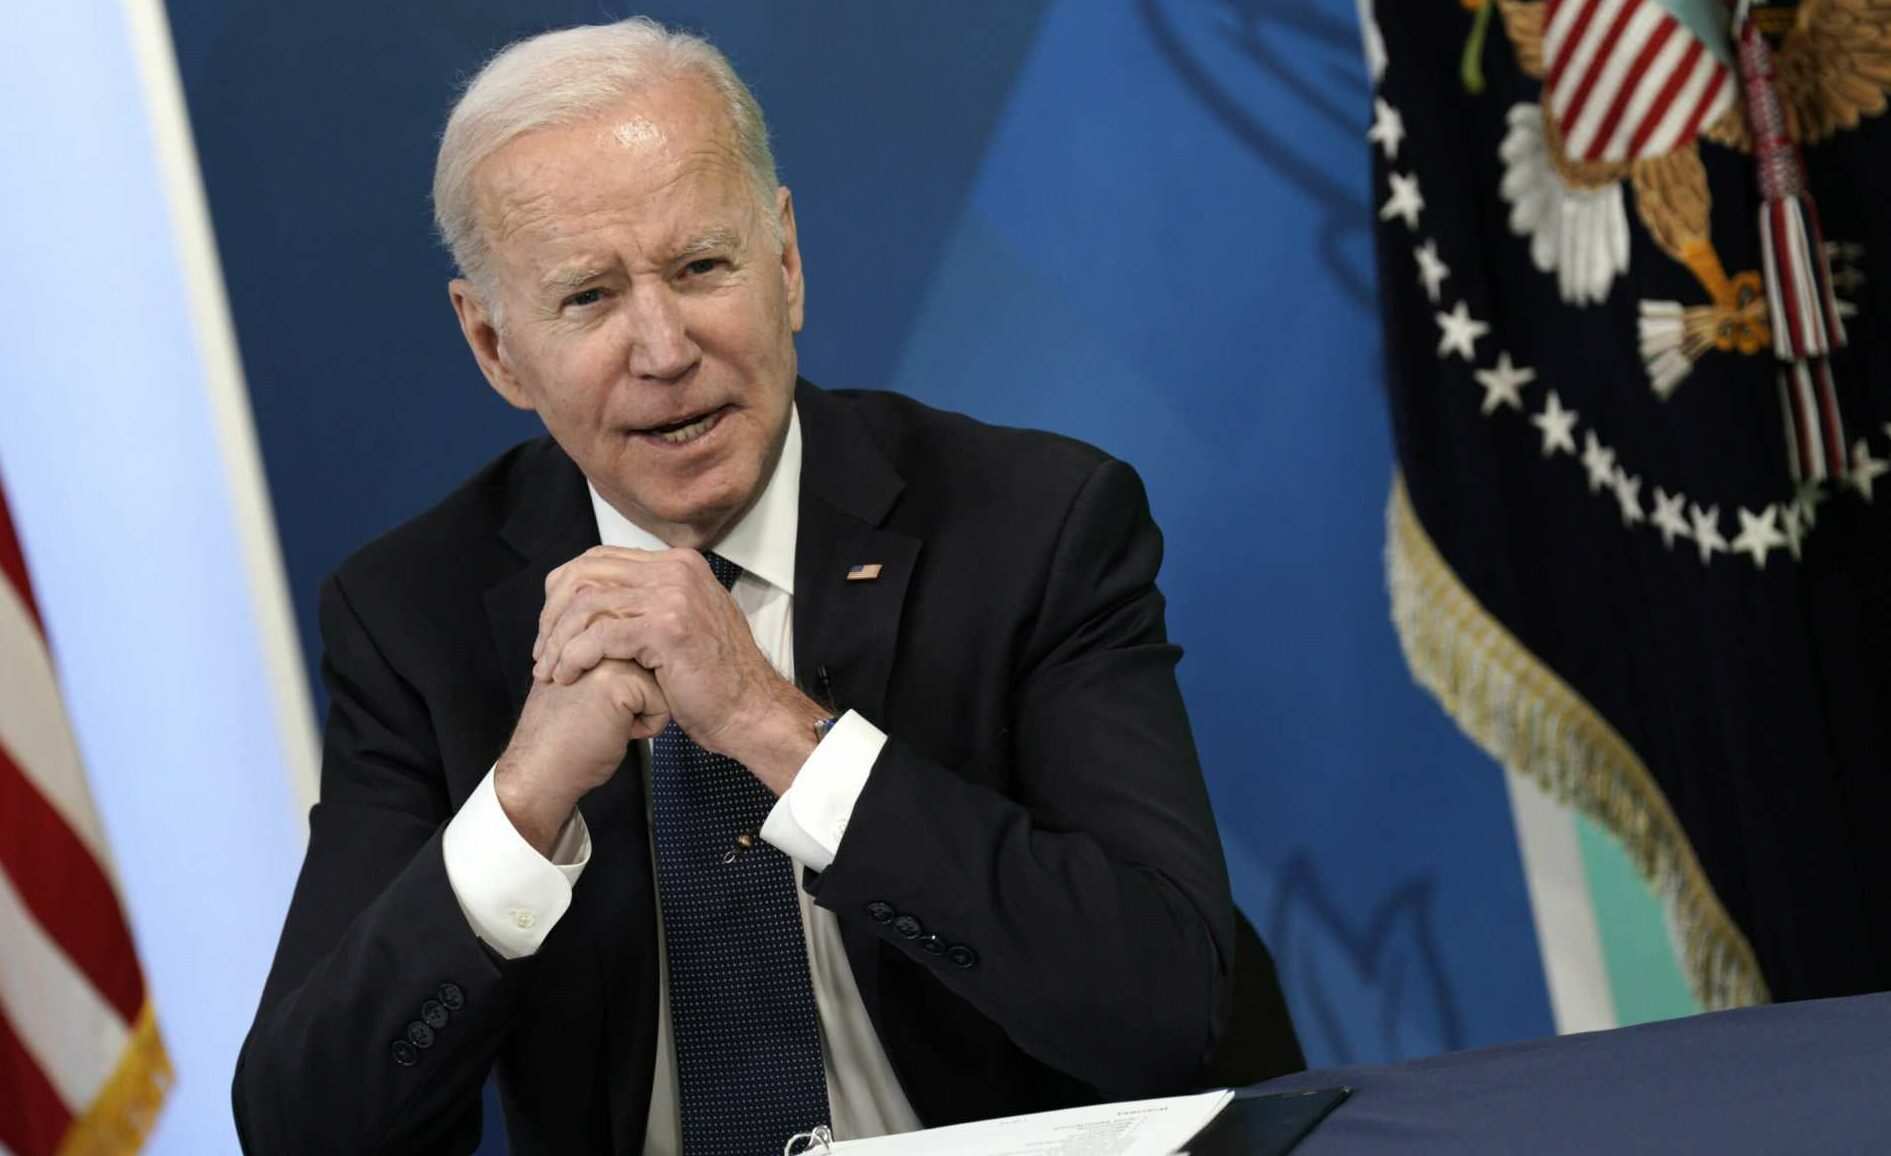 Emails show Biden admin colluded with Facebook, Twitter to censor Americans